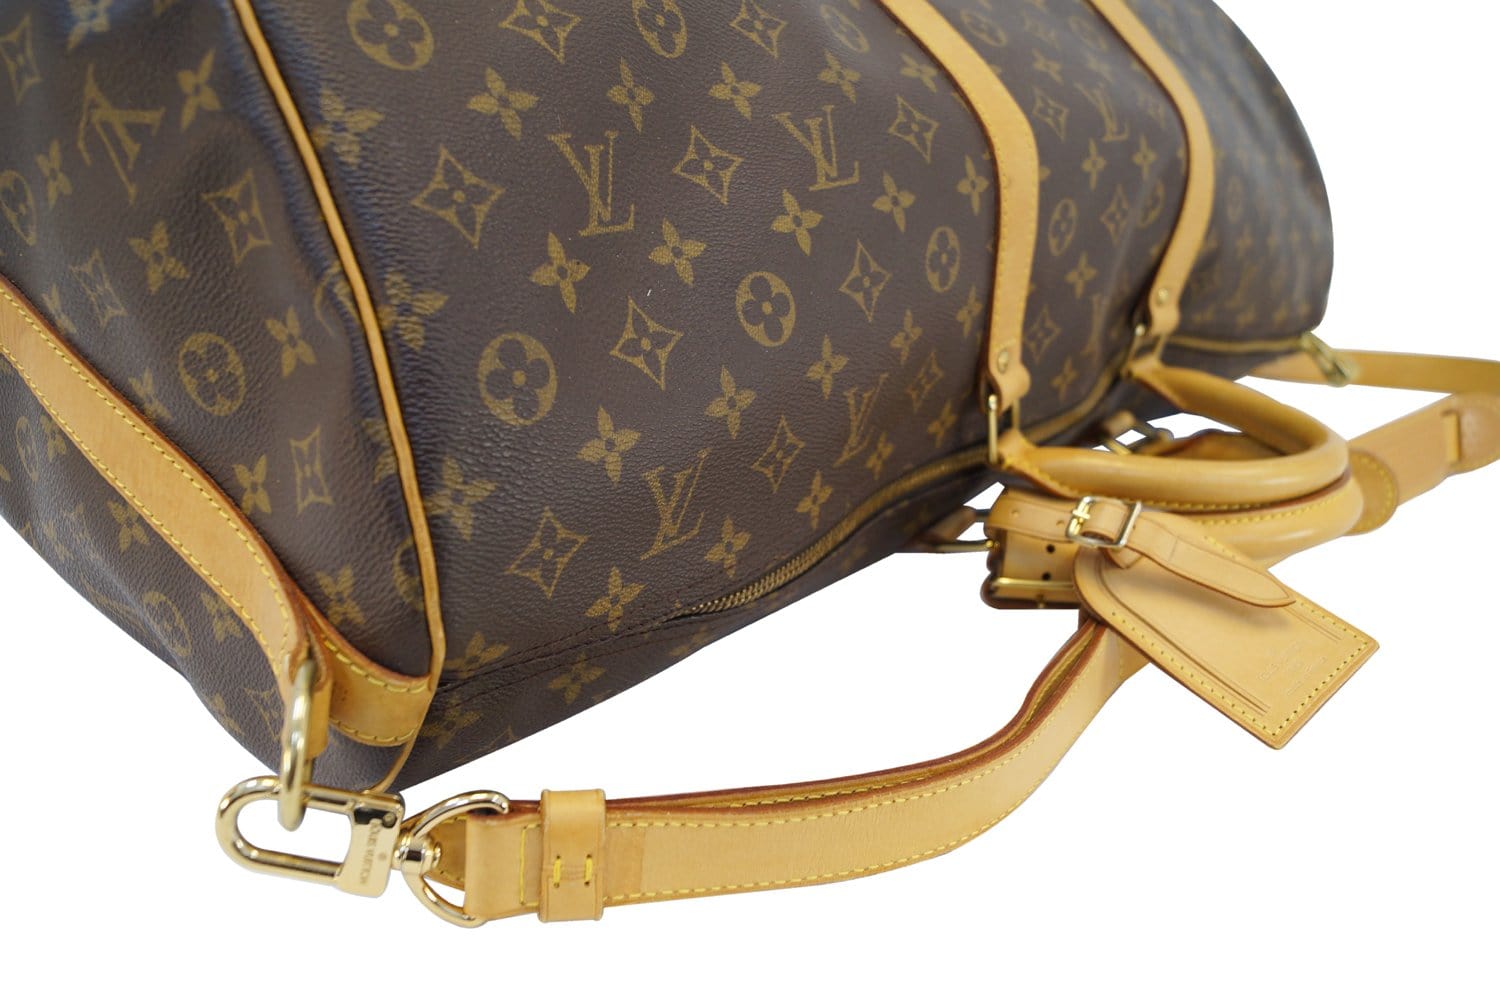 lv bandouliere 60